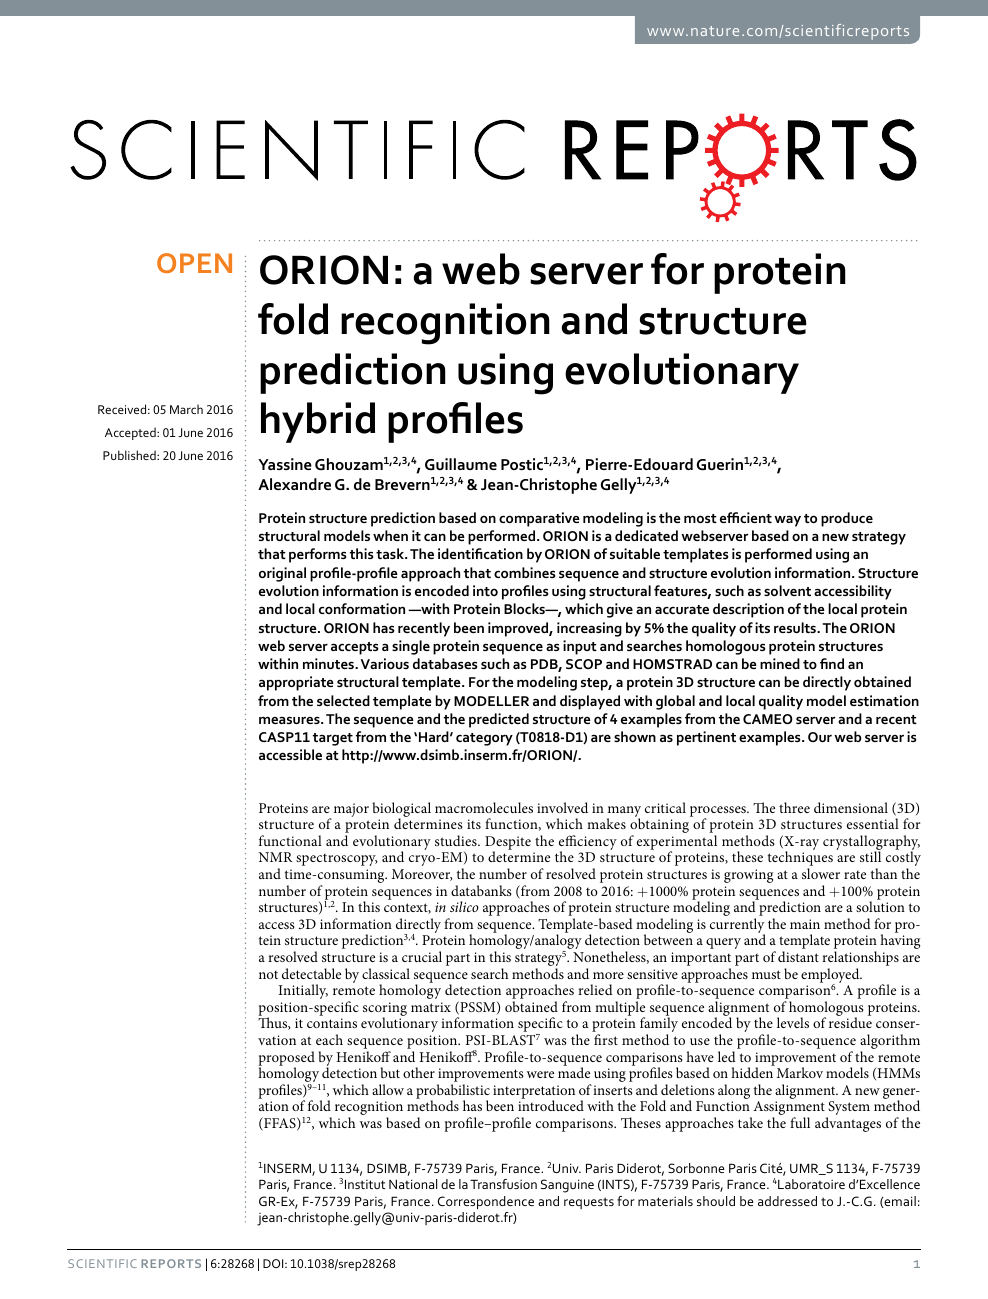 Orion A Web Server For Protein Fold Recognition And Structure Prediction Using Evolutionary Hybrid Profiles Topic Of Research Paper In Biological Sciences Download Scholarly Article Pdf And Read For Free On